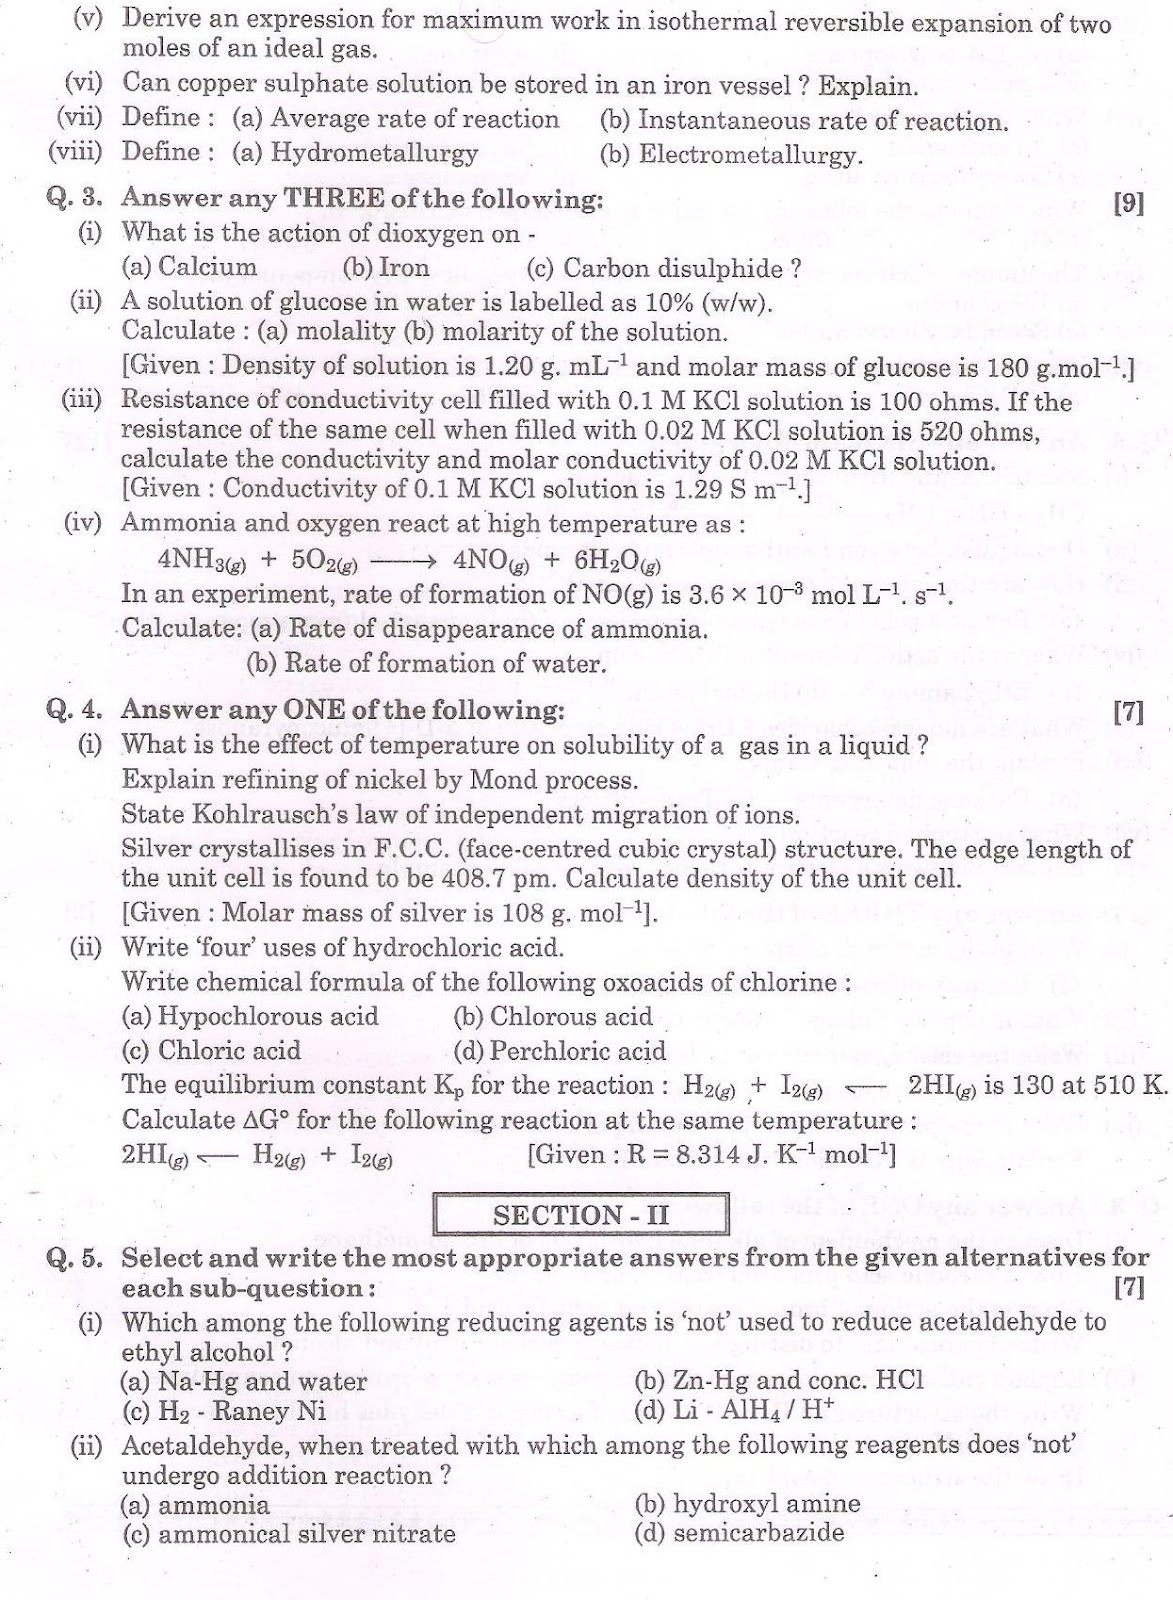 Chemistry - section I-II-October 2015 hsc-hsc.co.in